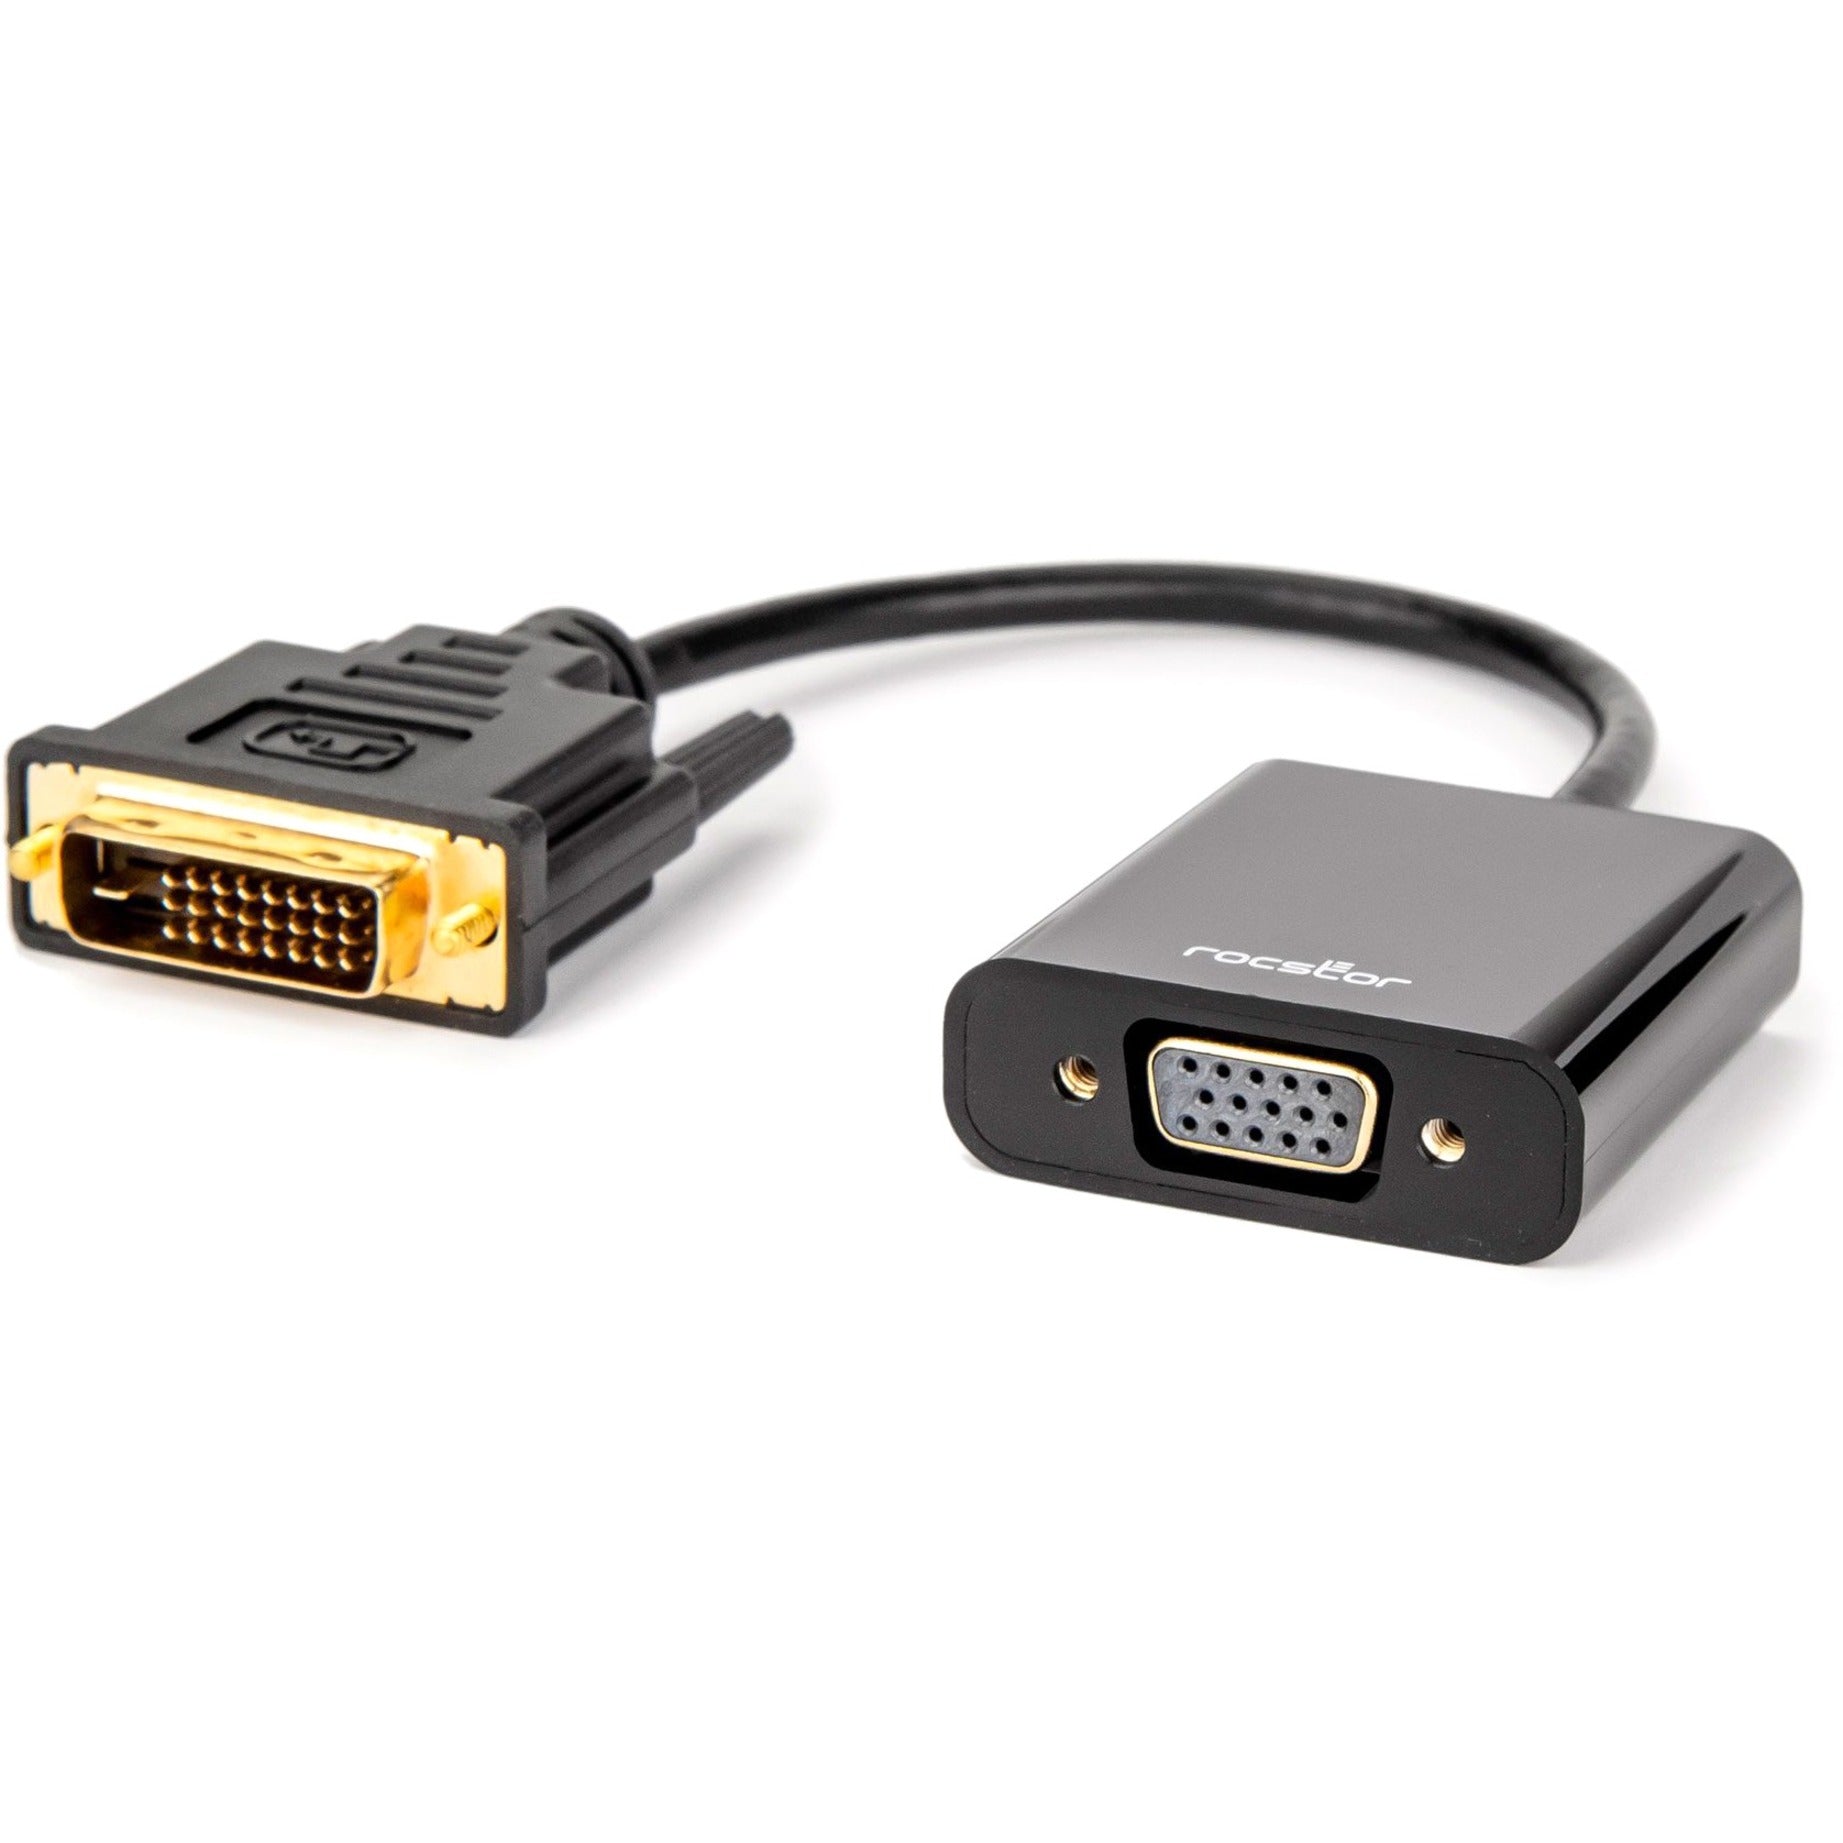 Rocstor Y10A198-B1 Premium DVI-D to VGA Active Adapter Converter Cable - 1920x1200, Gold-Plated Connectors, 2-Year Warranty